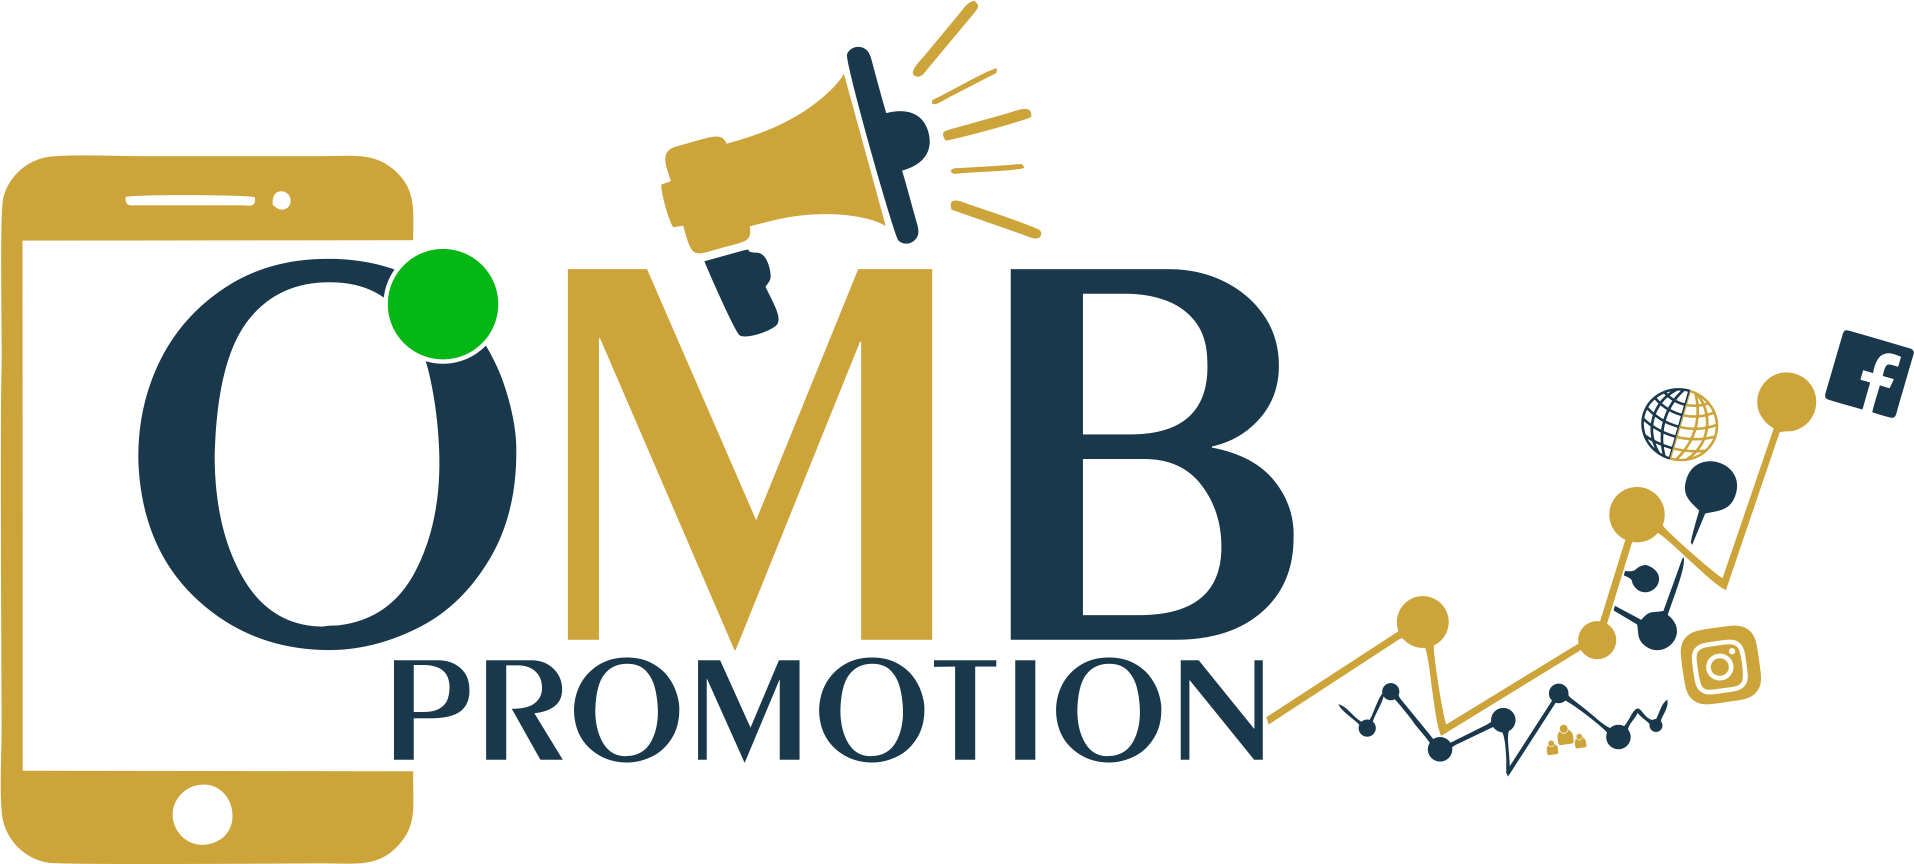 MG Promotions - Promotional Staffing & Event Agency in London & UK